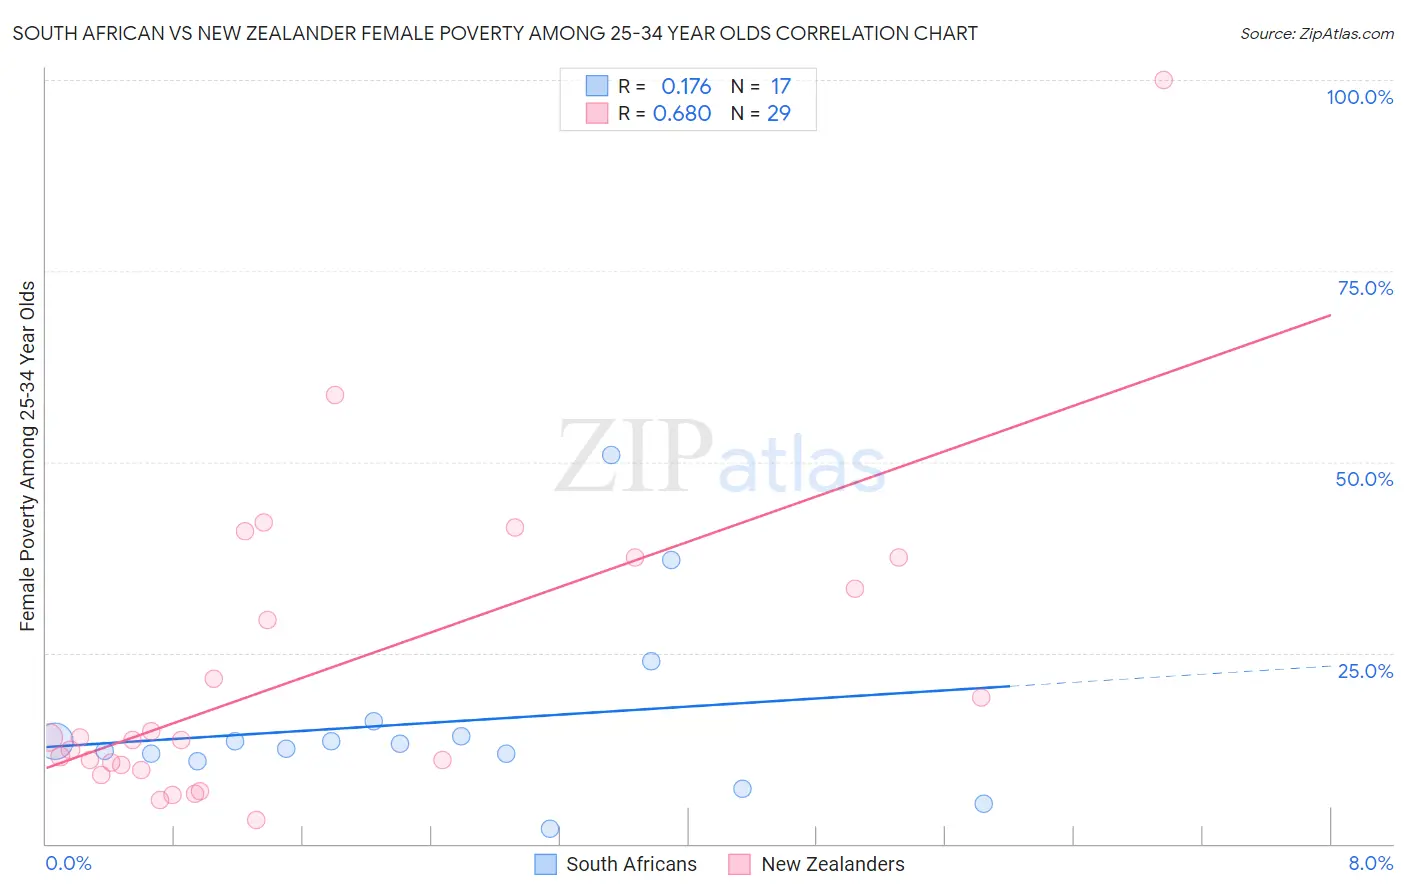 South African vs New Zealander Female Poverty Among 25-34 Year Olds